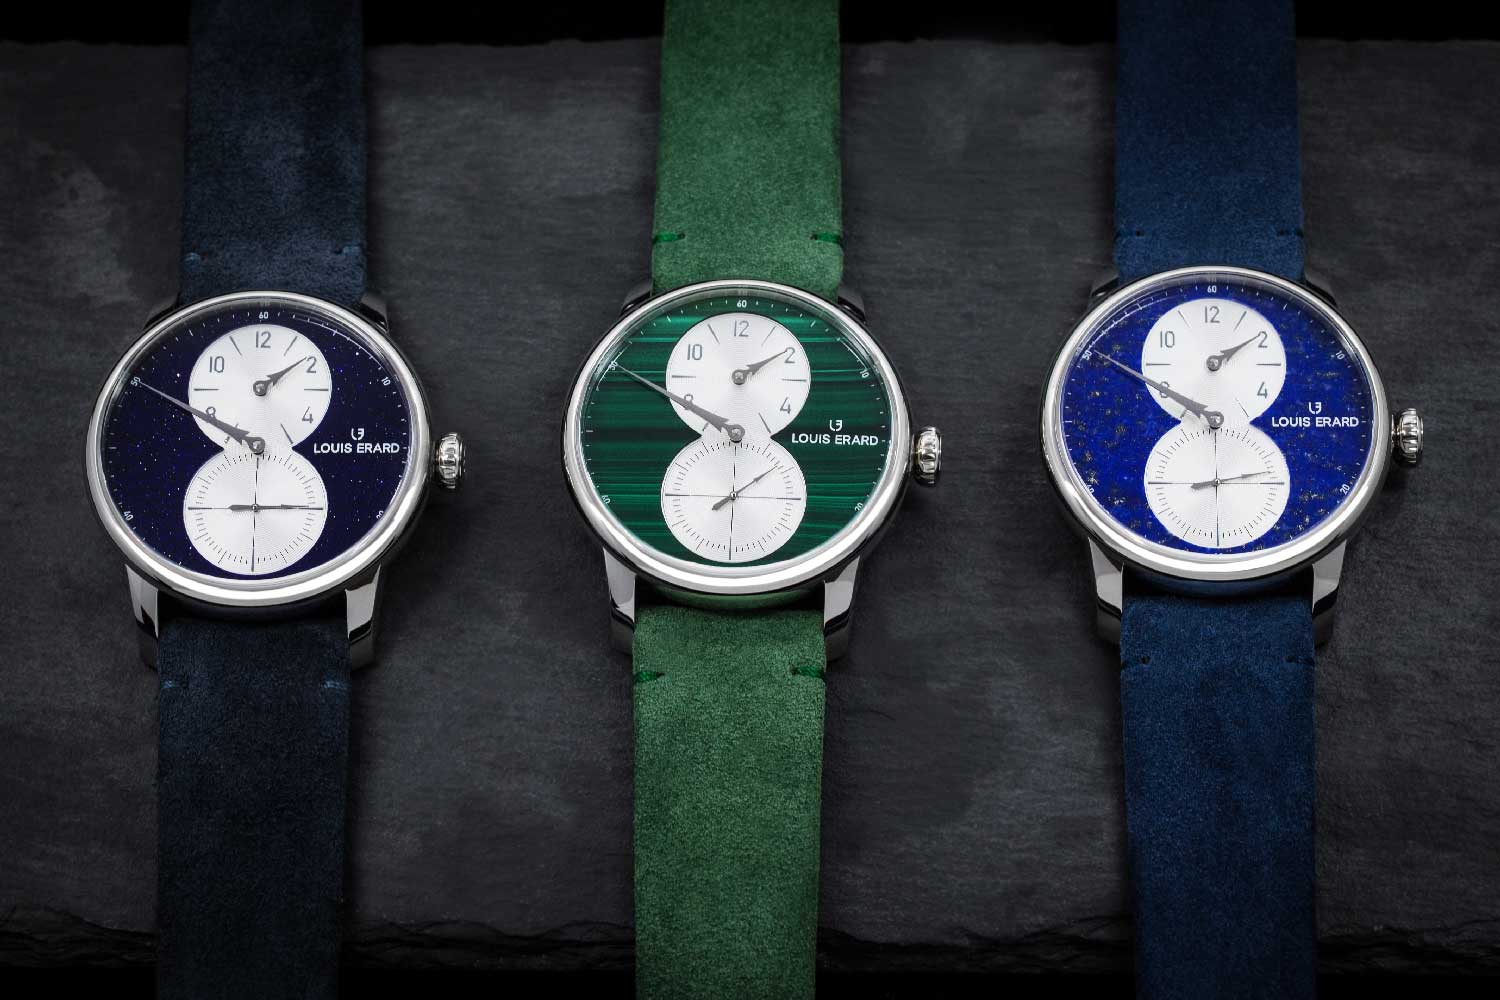 Available in aventurine glass, lapis-lazuli and malachite, each Excellence Régulateur variation is limited to 99 pieces.